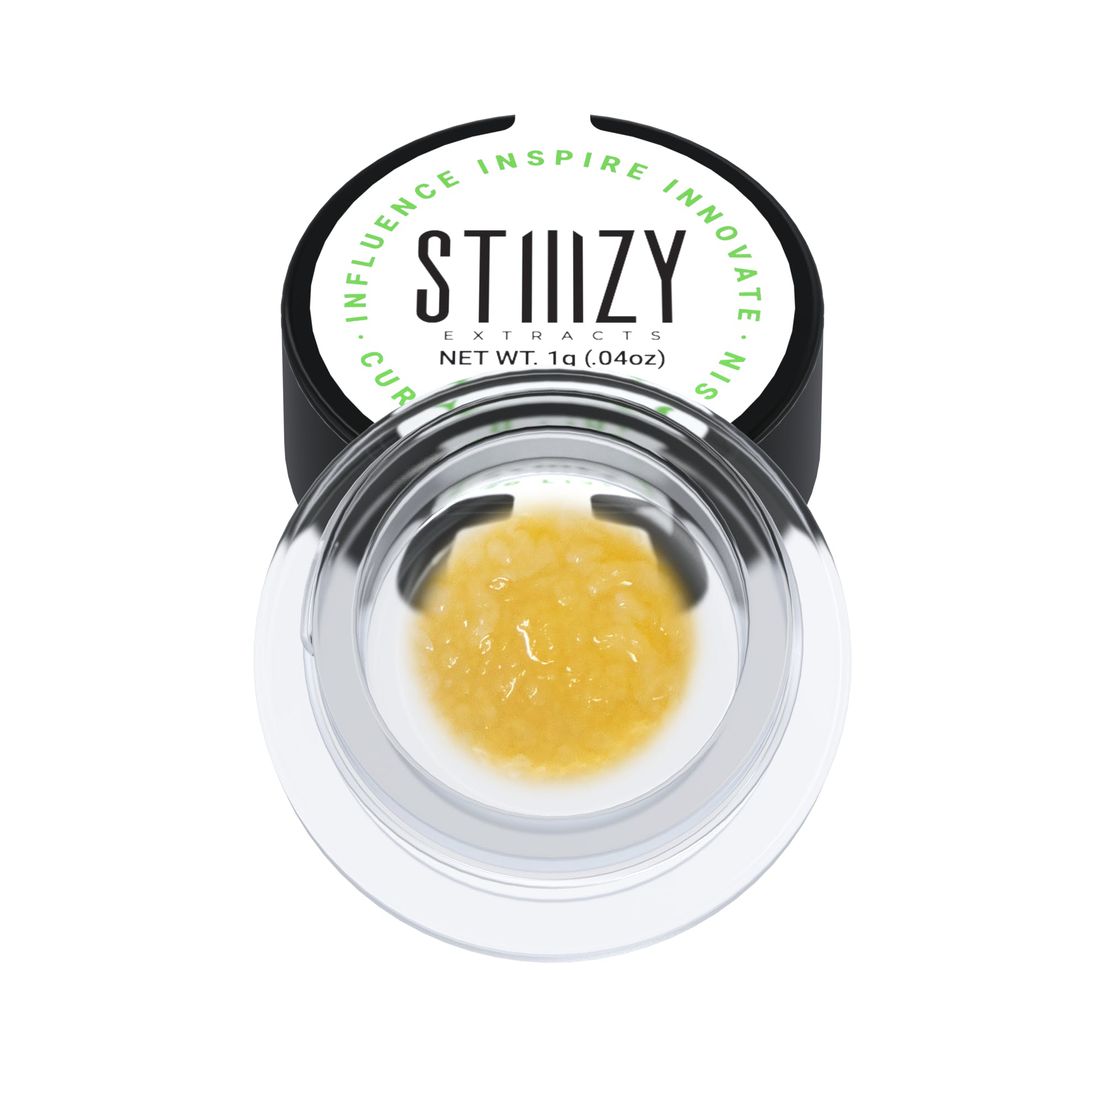 STIIIZY - Sugar Cookies Curated Live Resin Extract - 1.0g